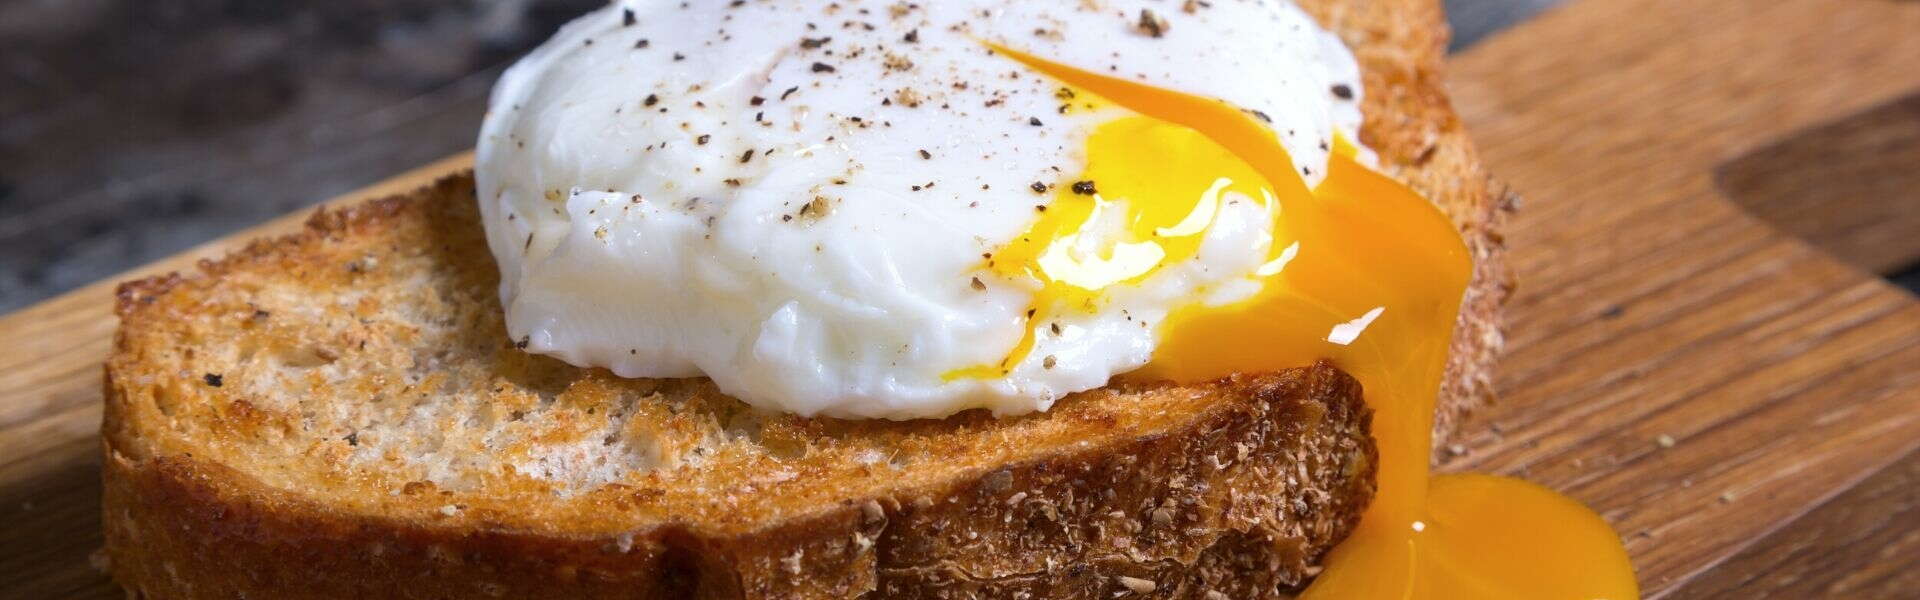 Are eggs good for you? How many calories they contain and when to eat them